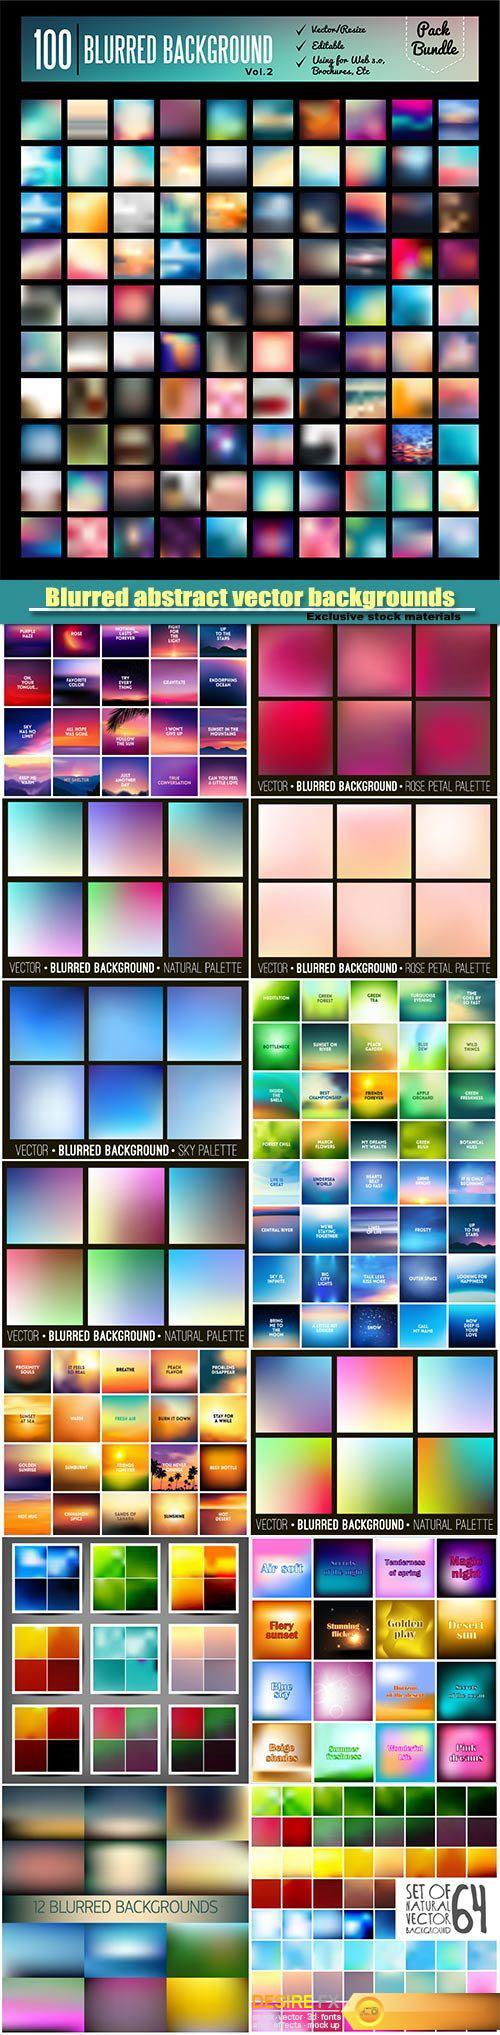 Blurred abstract vector backgrounds set